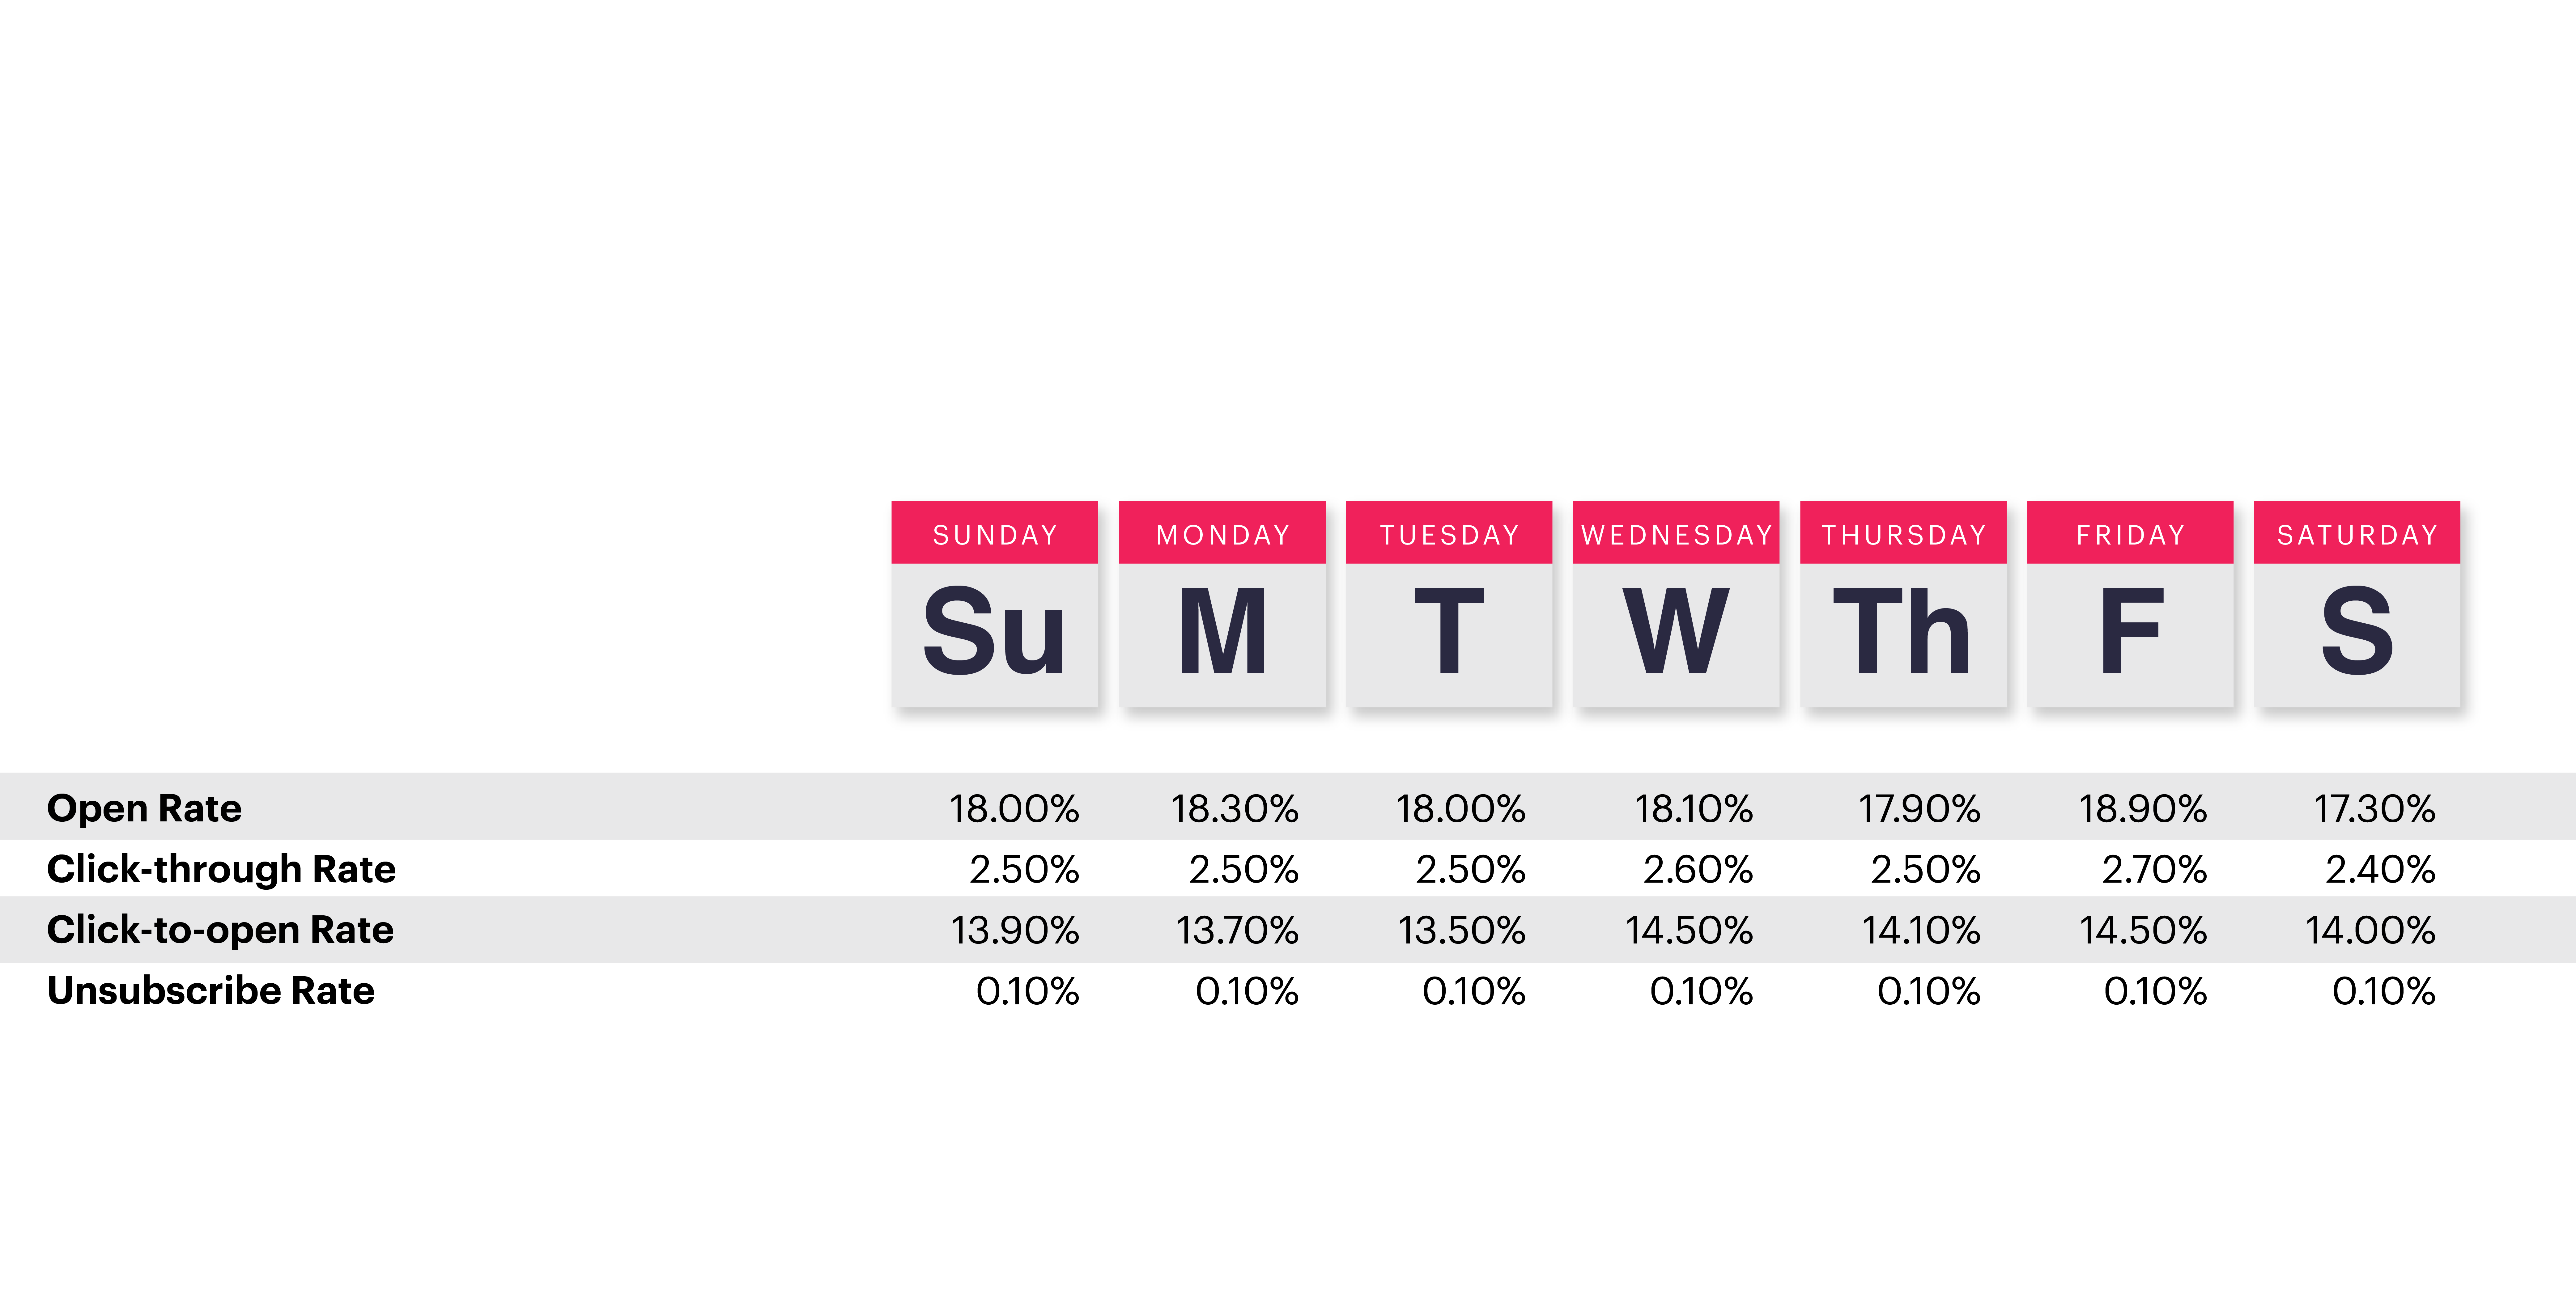 days of the week and open rate